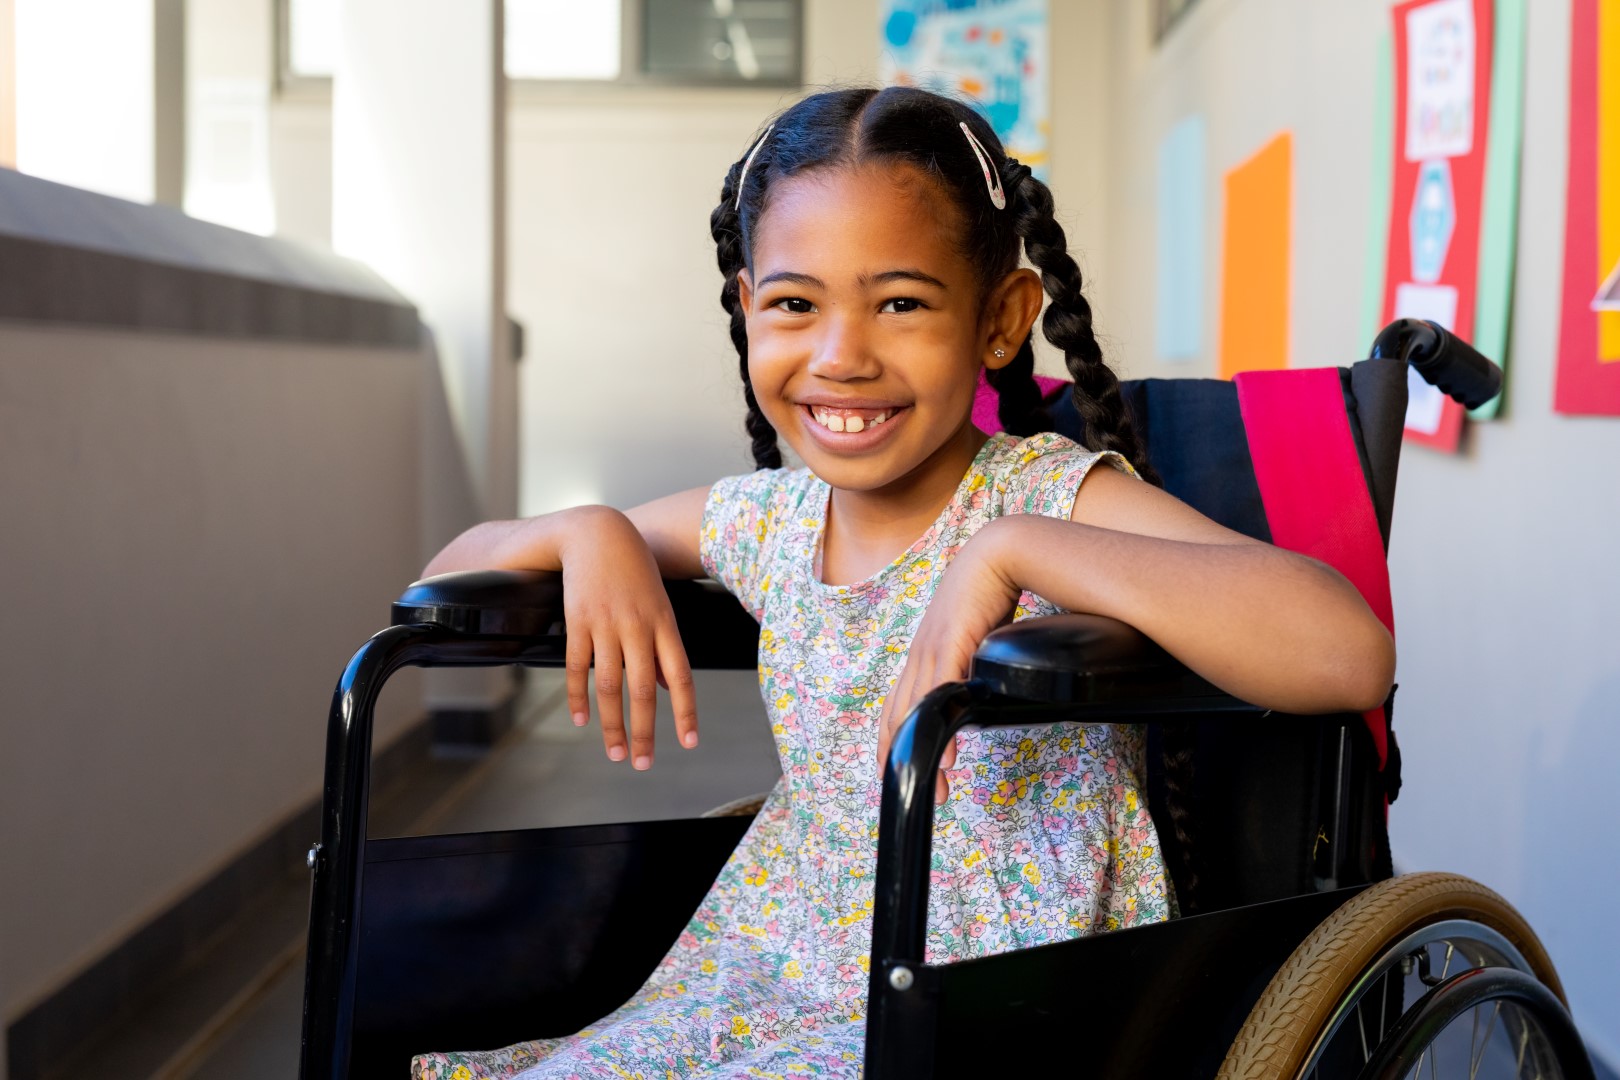 Young girl smiling while sitting in wheelchair